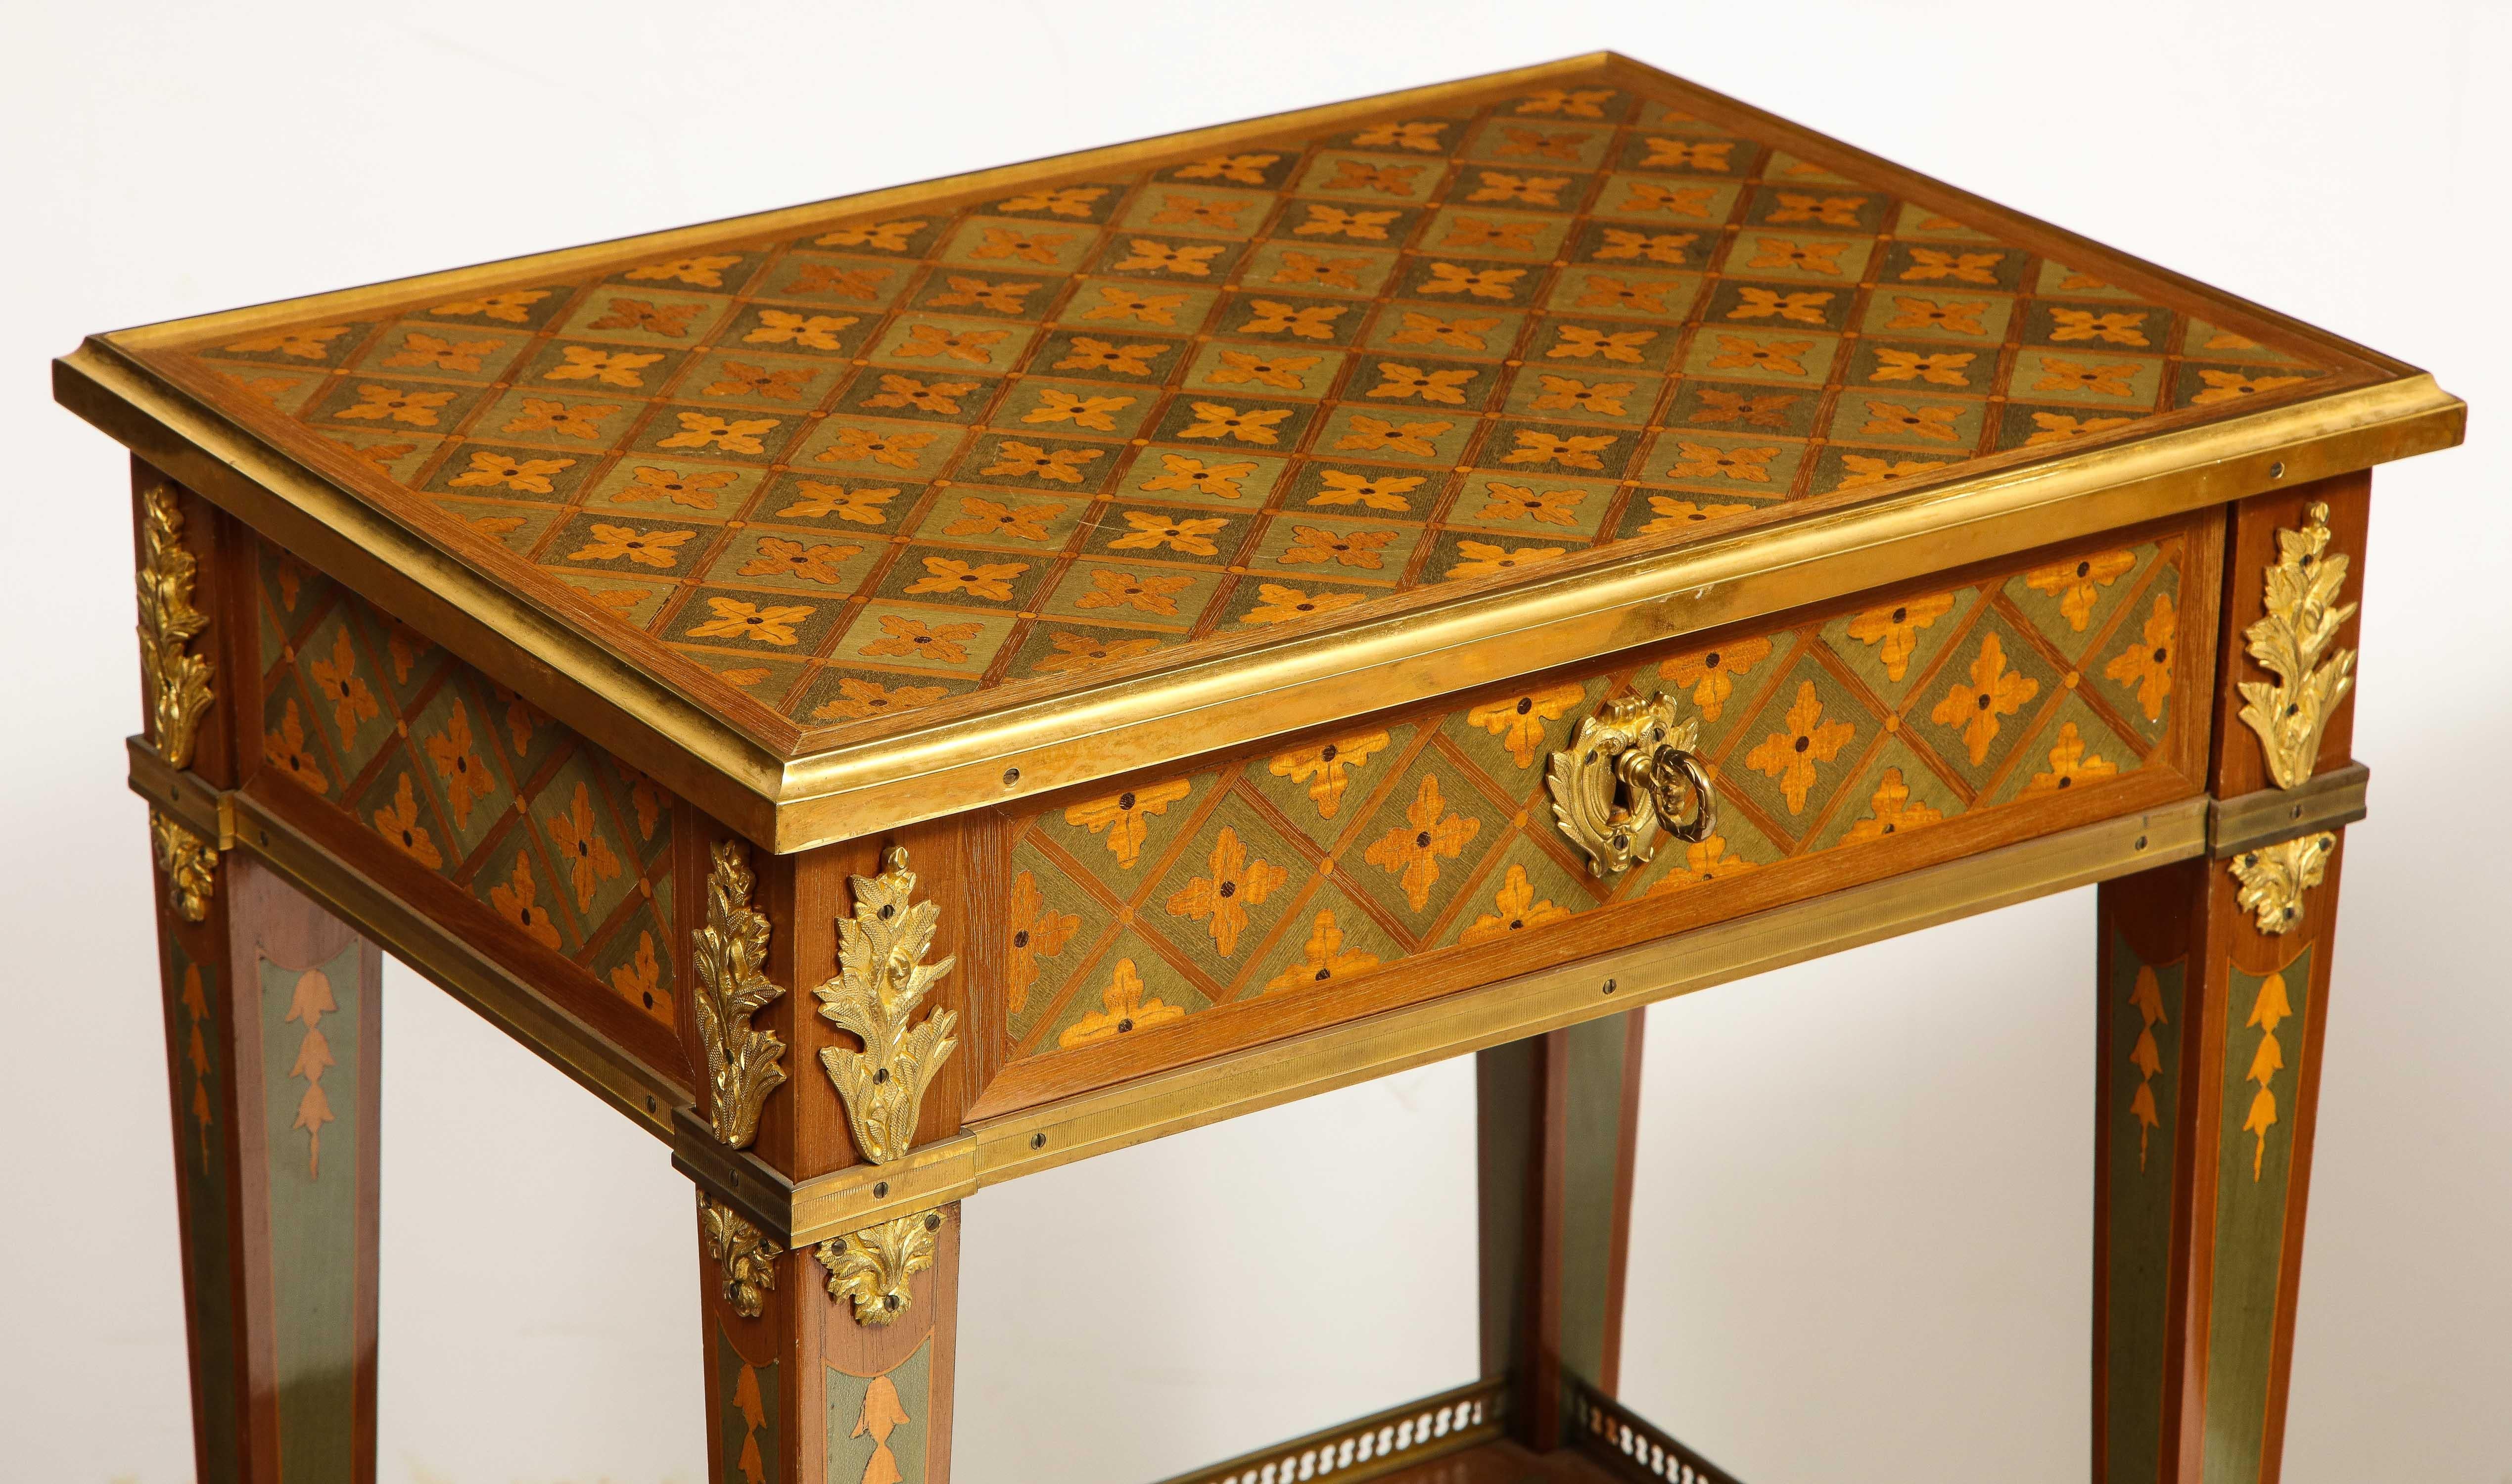 Bronze Exceptional Pair of French Ormolu-Mounted Parquetry and Marquetry Side Tables For Sale